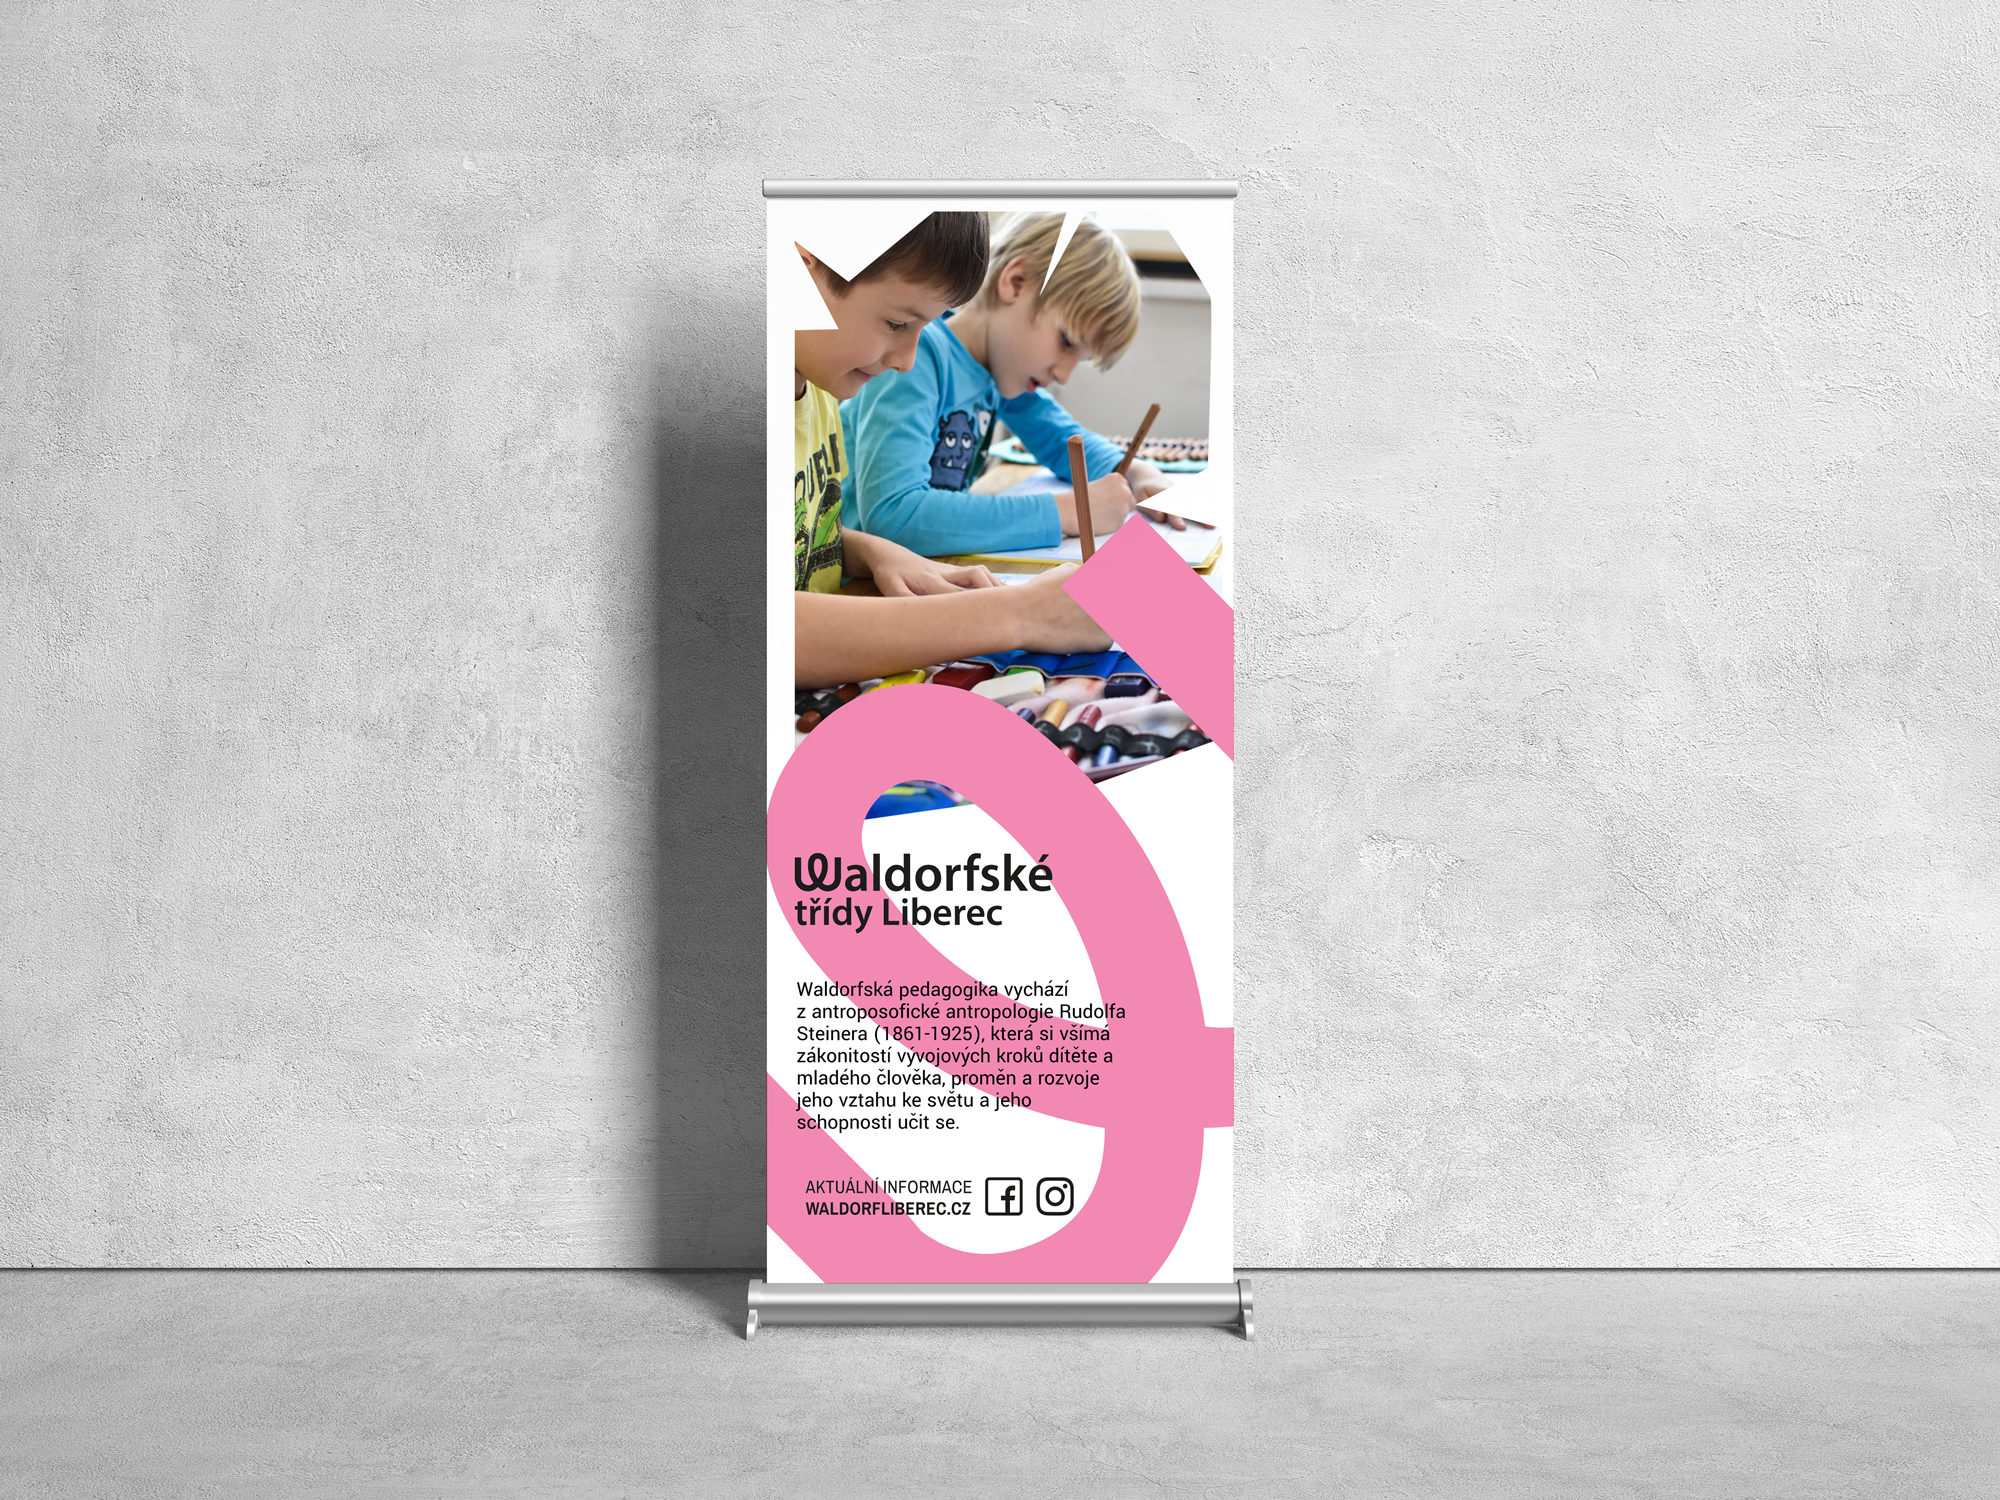 Free-Front-View-Roll-Up-Stand-Mockup